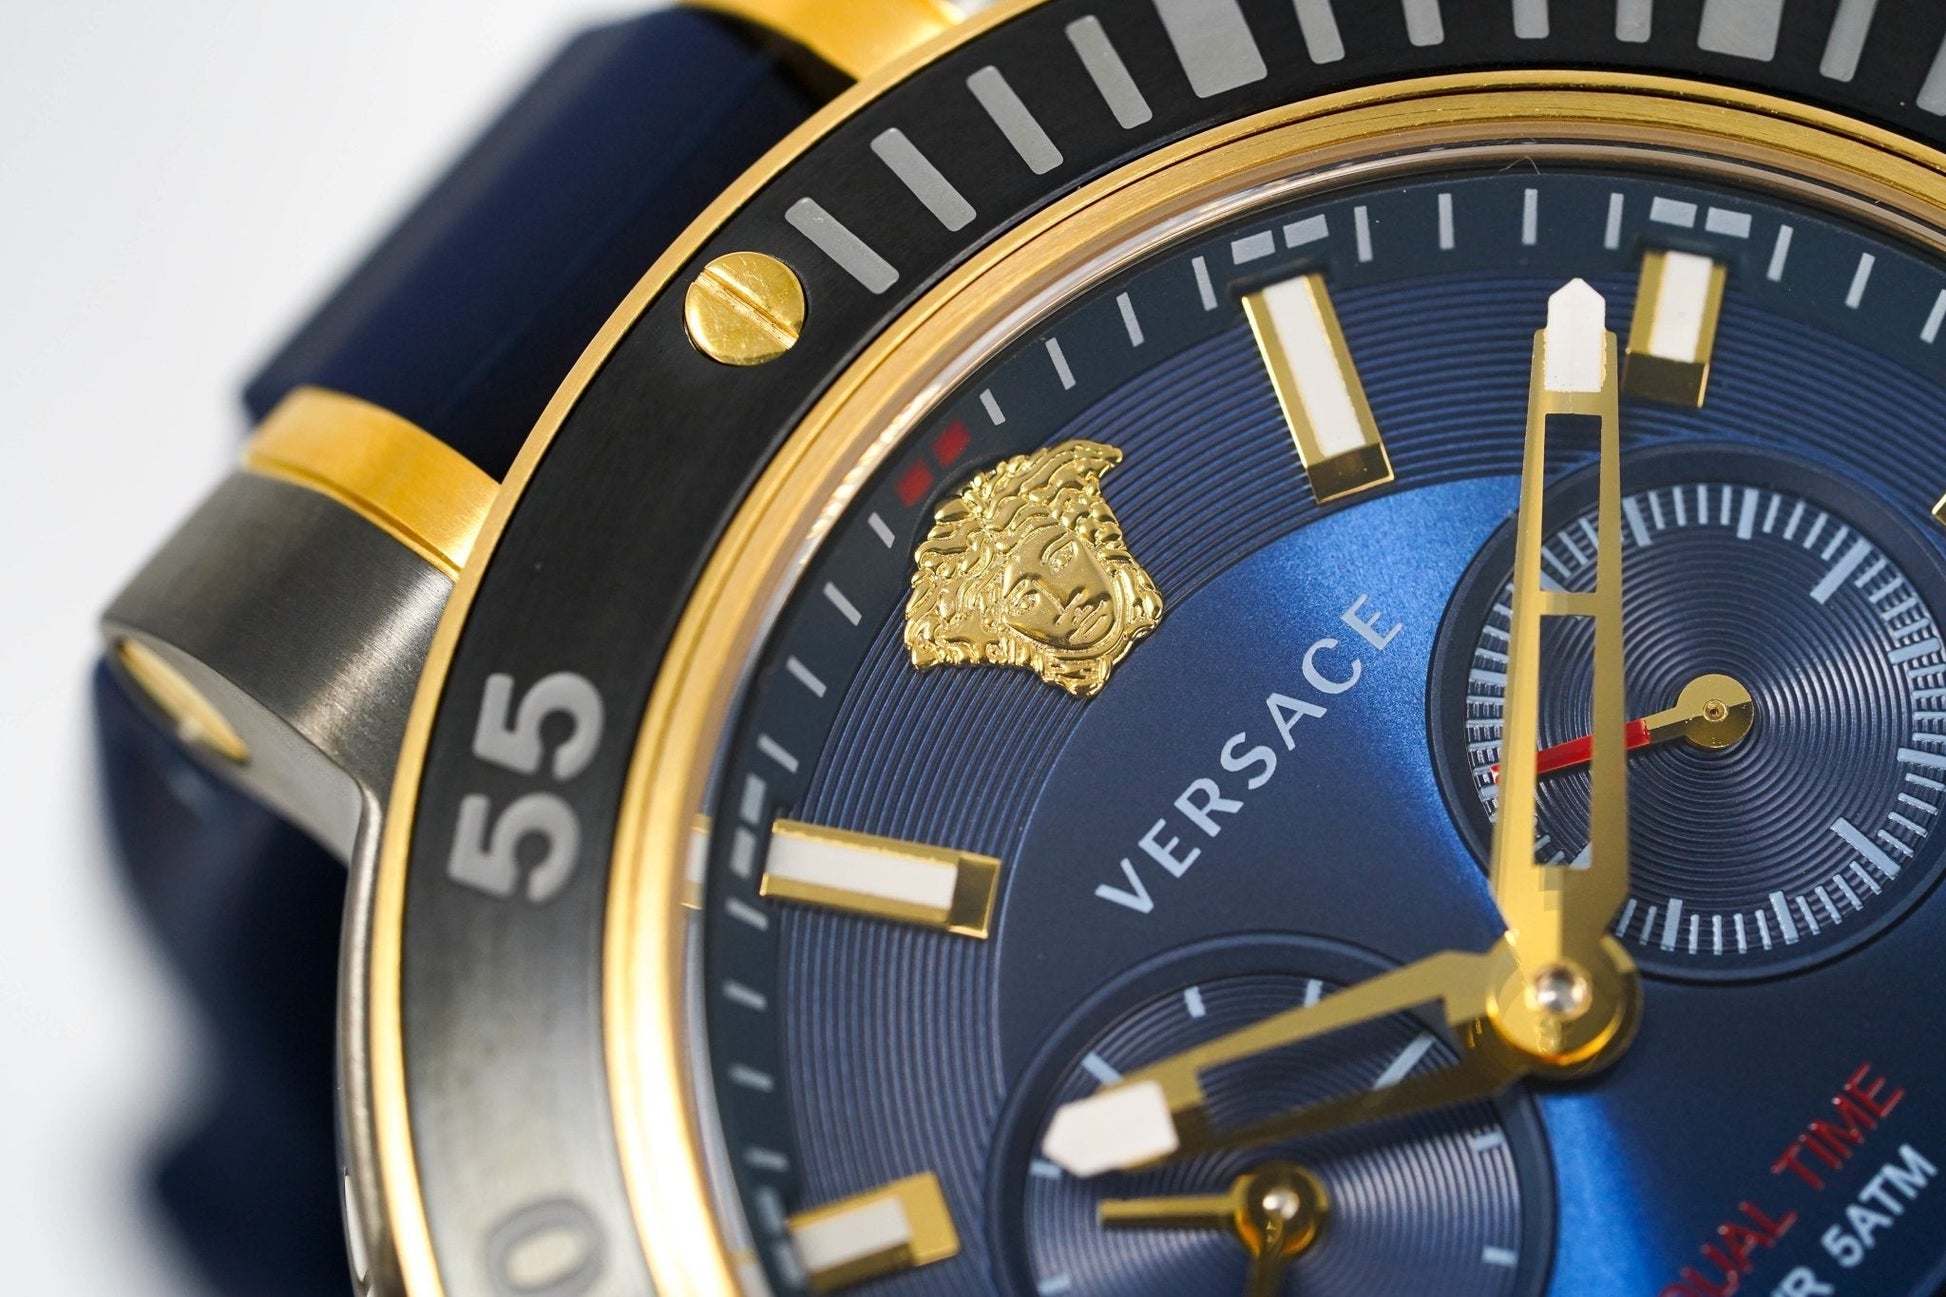 Versace V Extreme Chronograph Blue & Gold Tone Dial Blue Rubber Strap Watch for Men - VCN010017